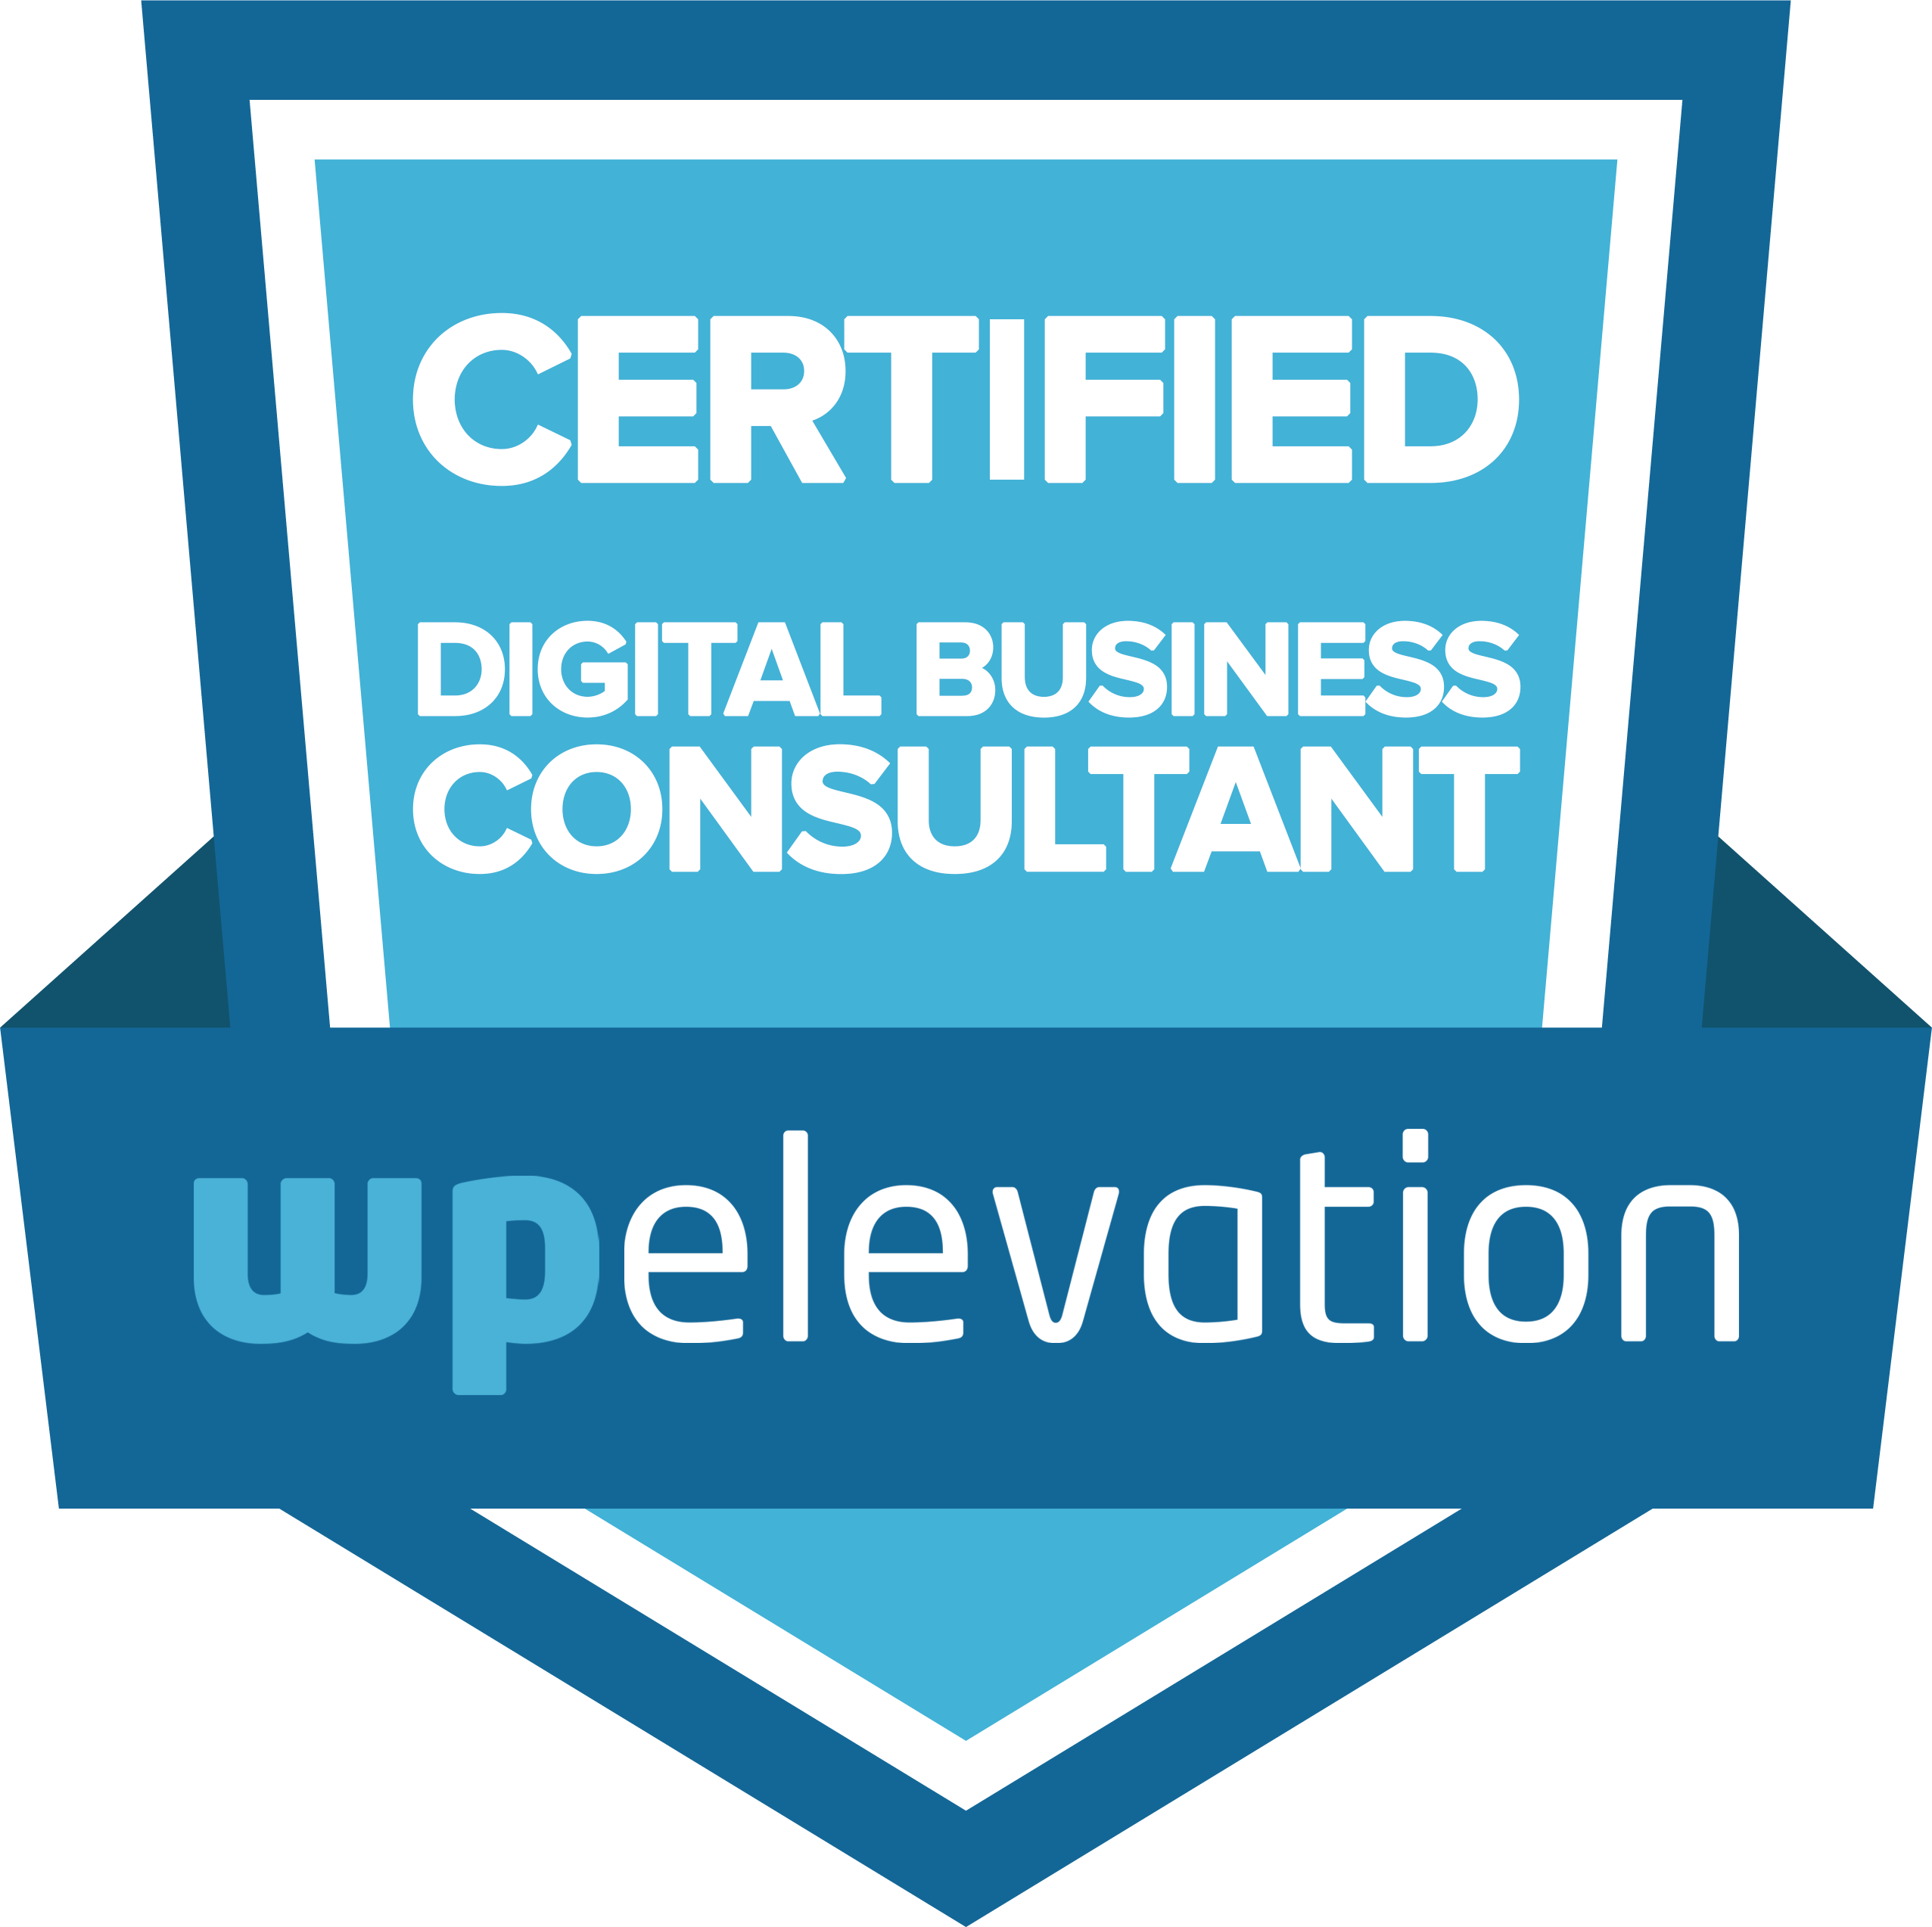 FLYNG 'OKOLE Chelsea Kohl Certified Digital Business Consultant from wpElevation on the About and Contact page.